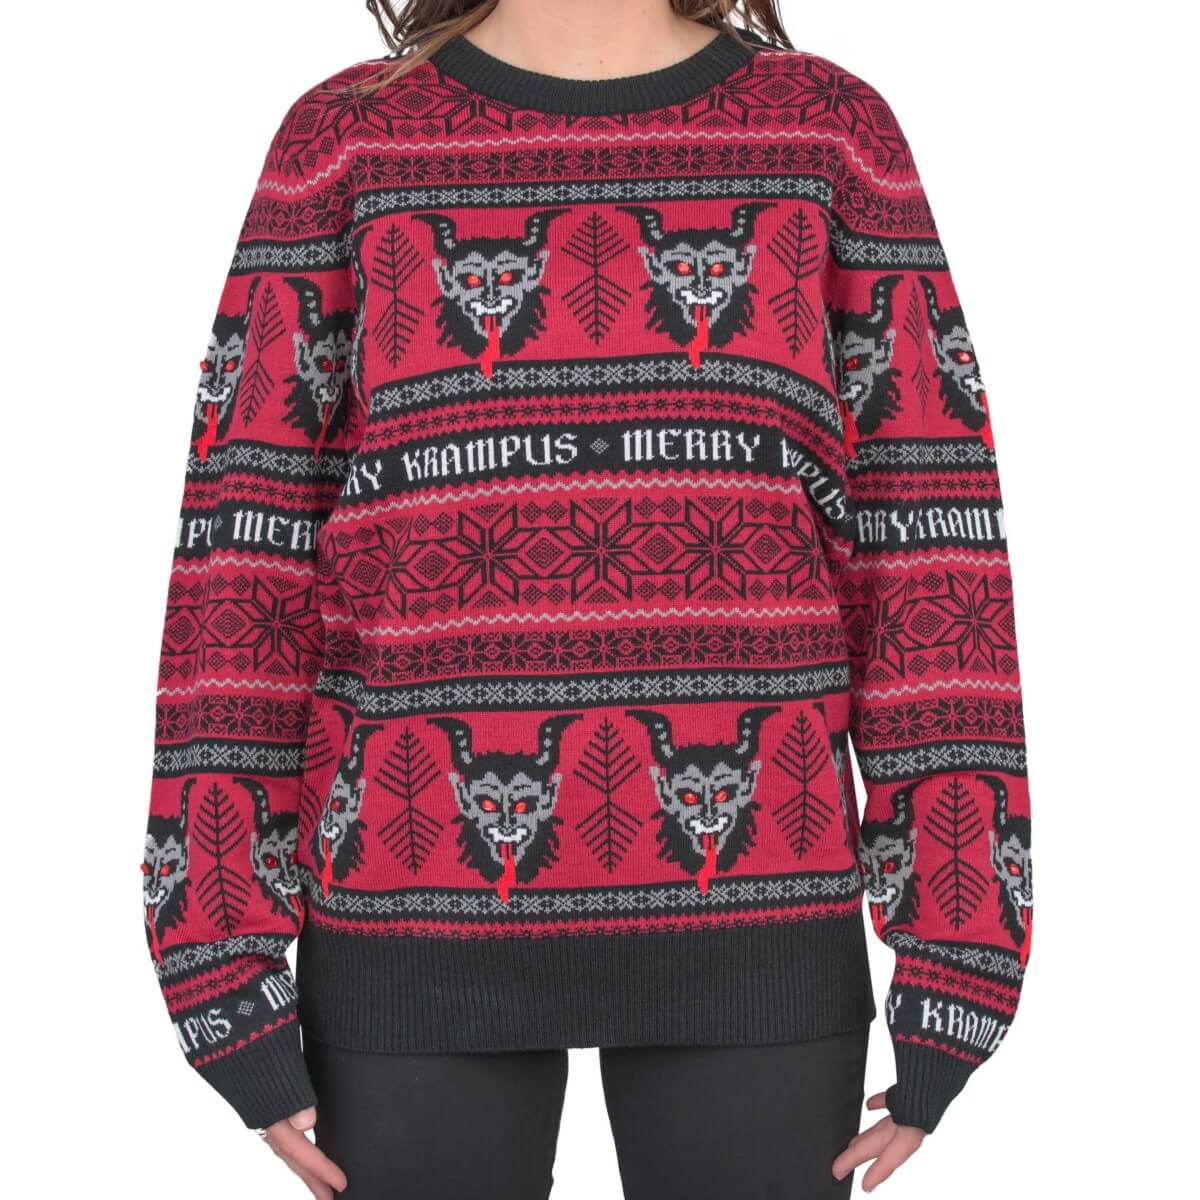 Women's Merry Krampus Adult Ugly Christmas Sweater - 5XL